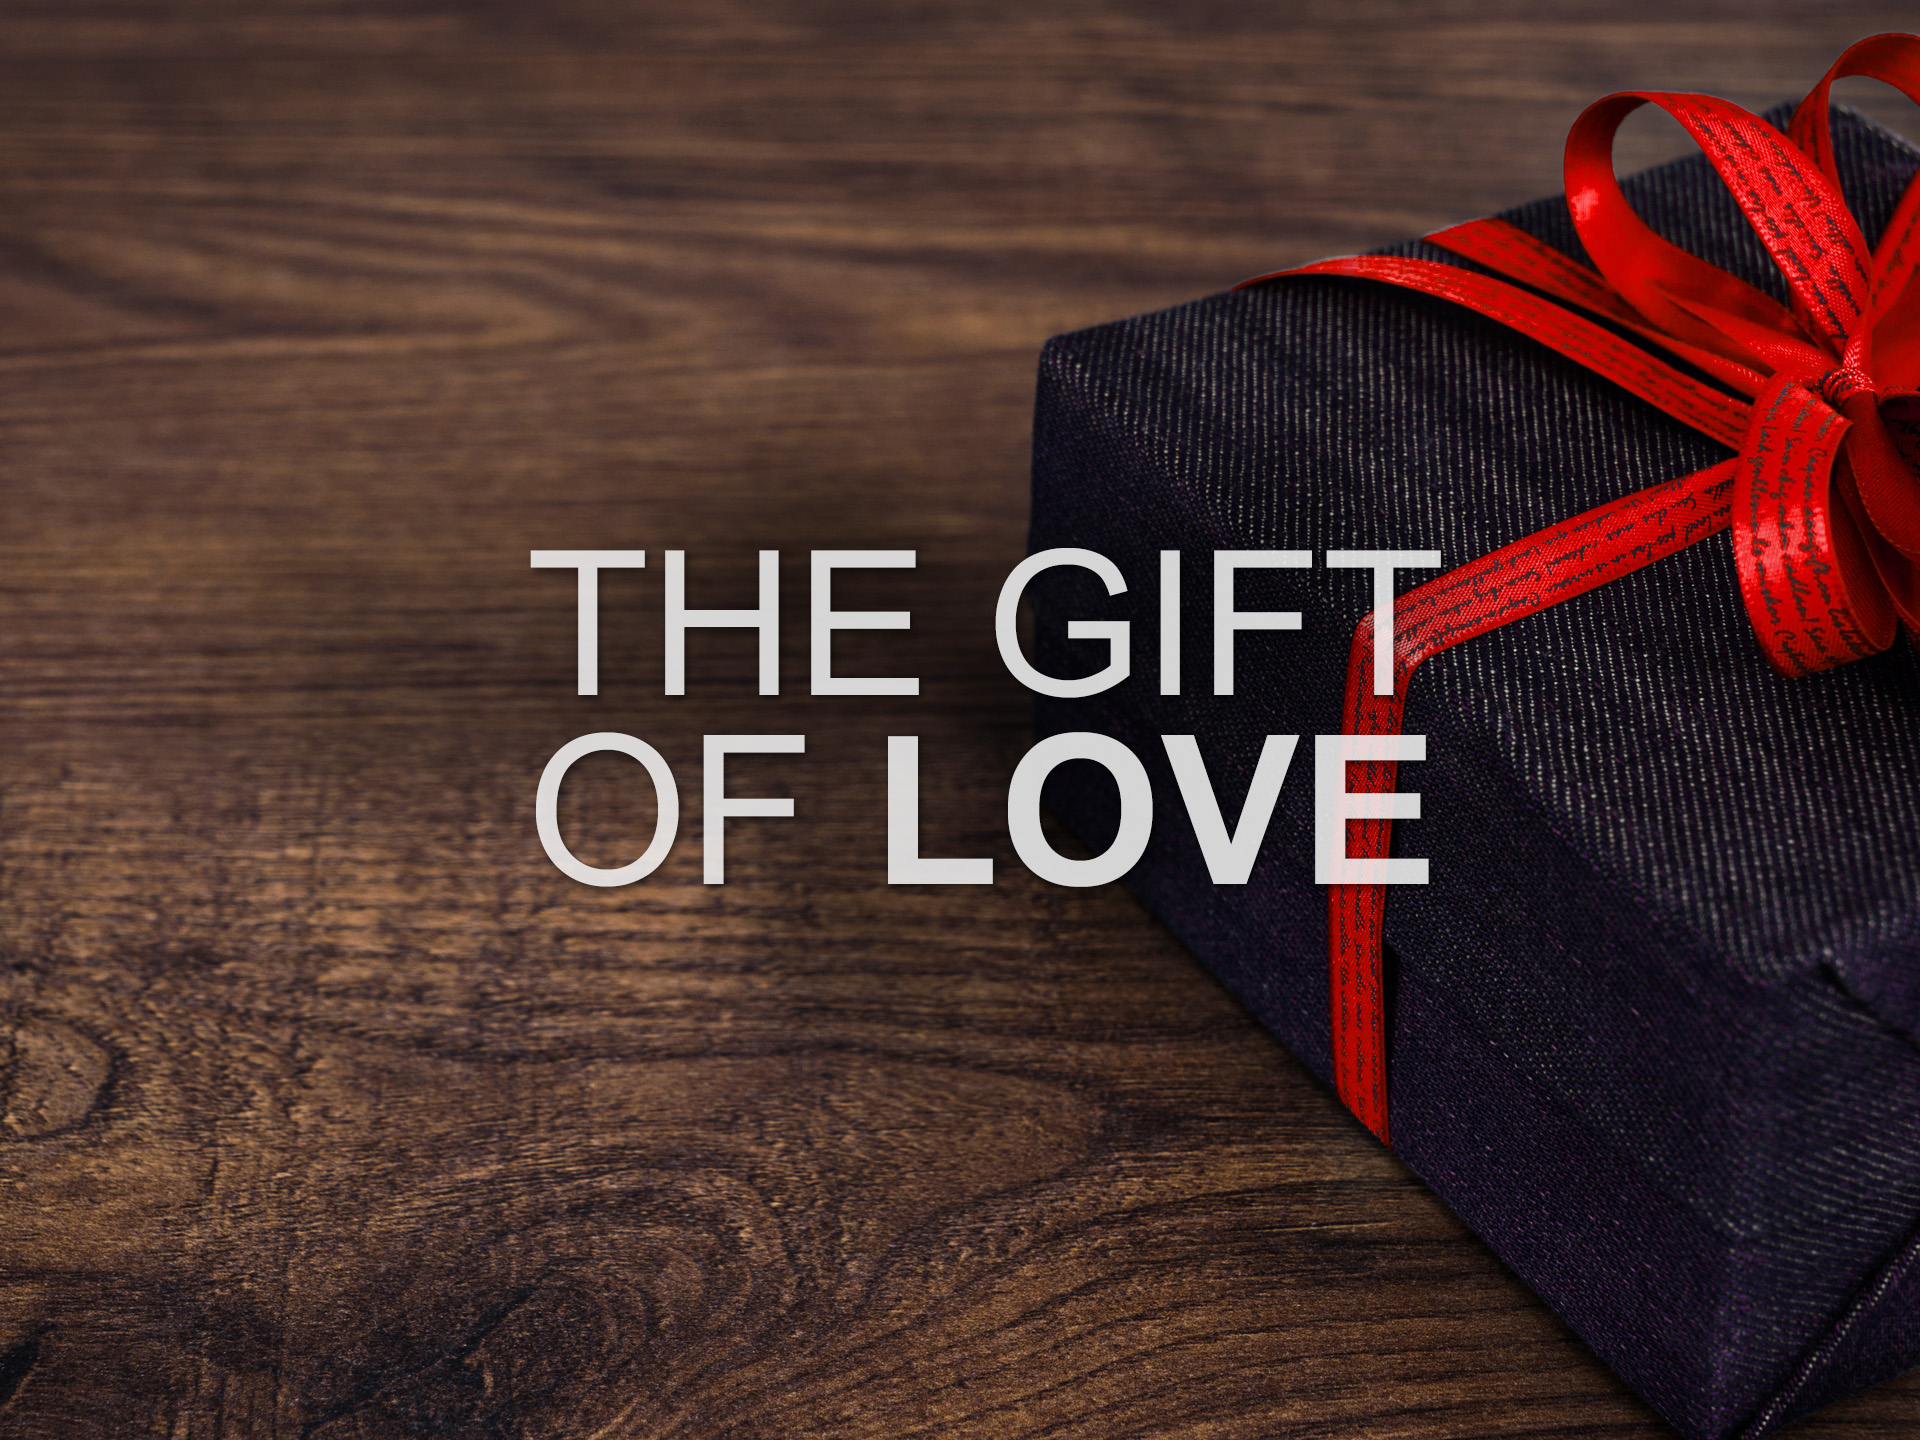 The Gift of love by Christopher Burgan